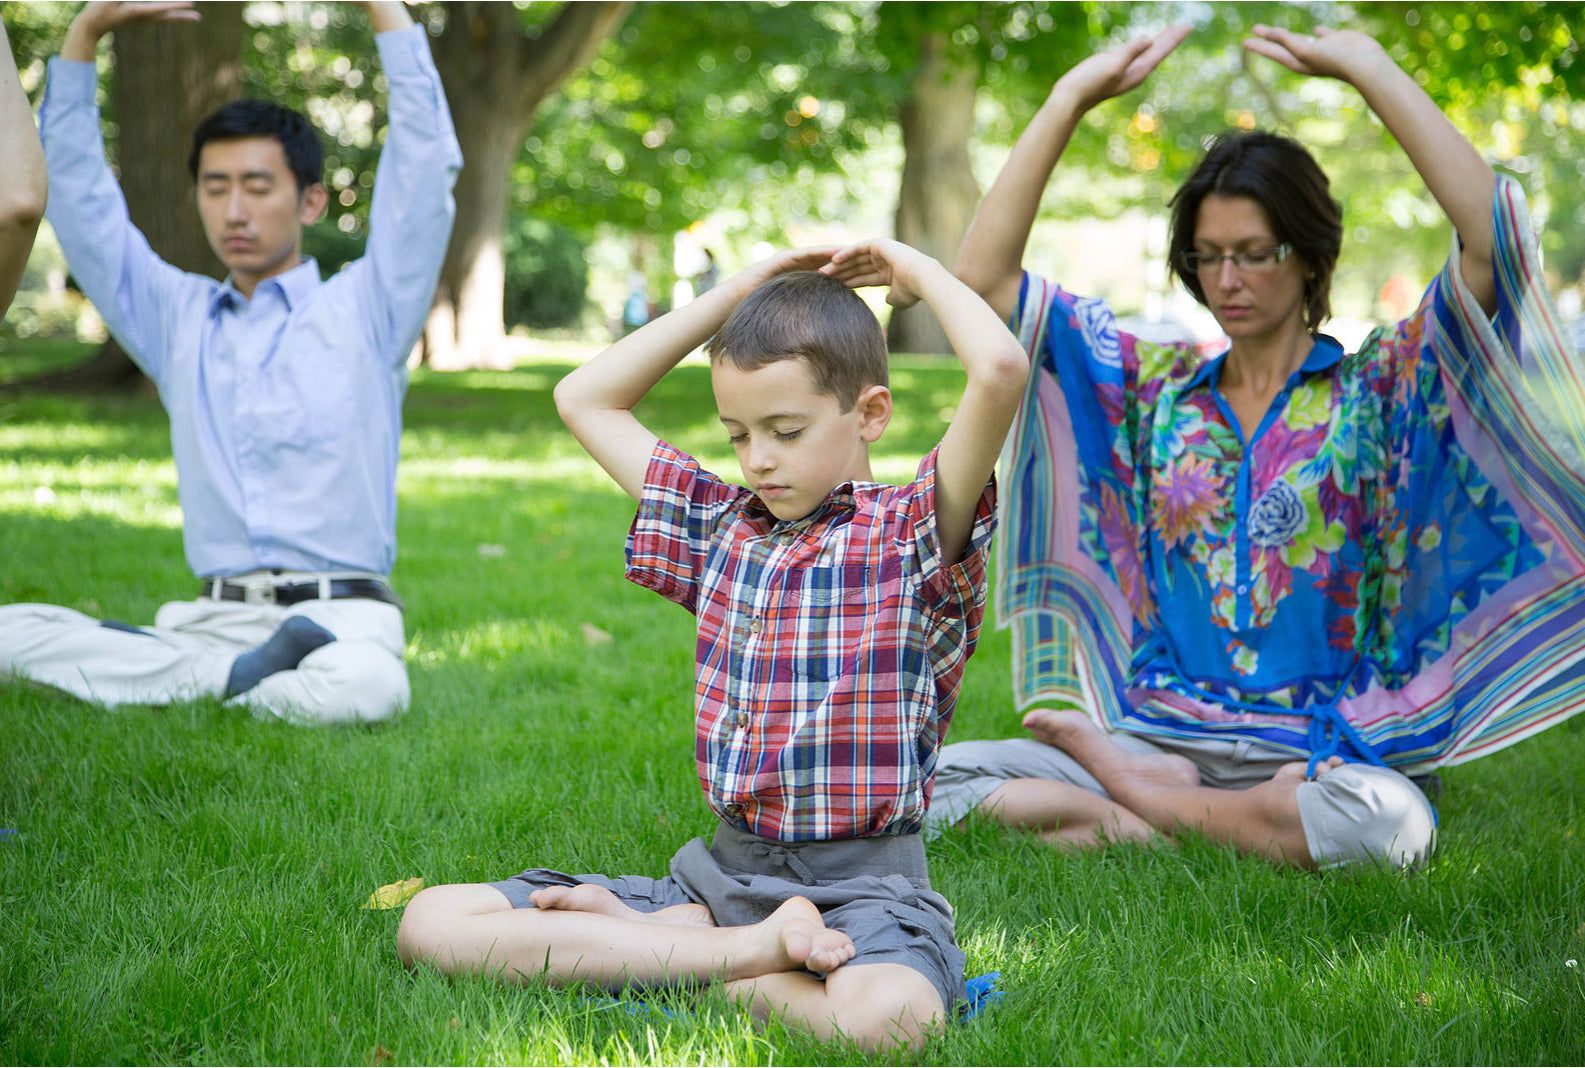 scientific-study-meditation-has-the-power-to-make-us-better-persons